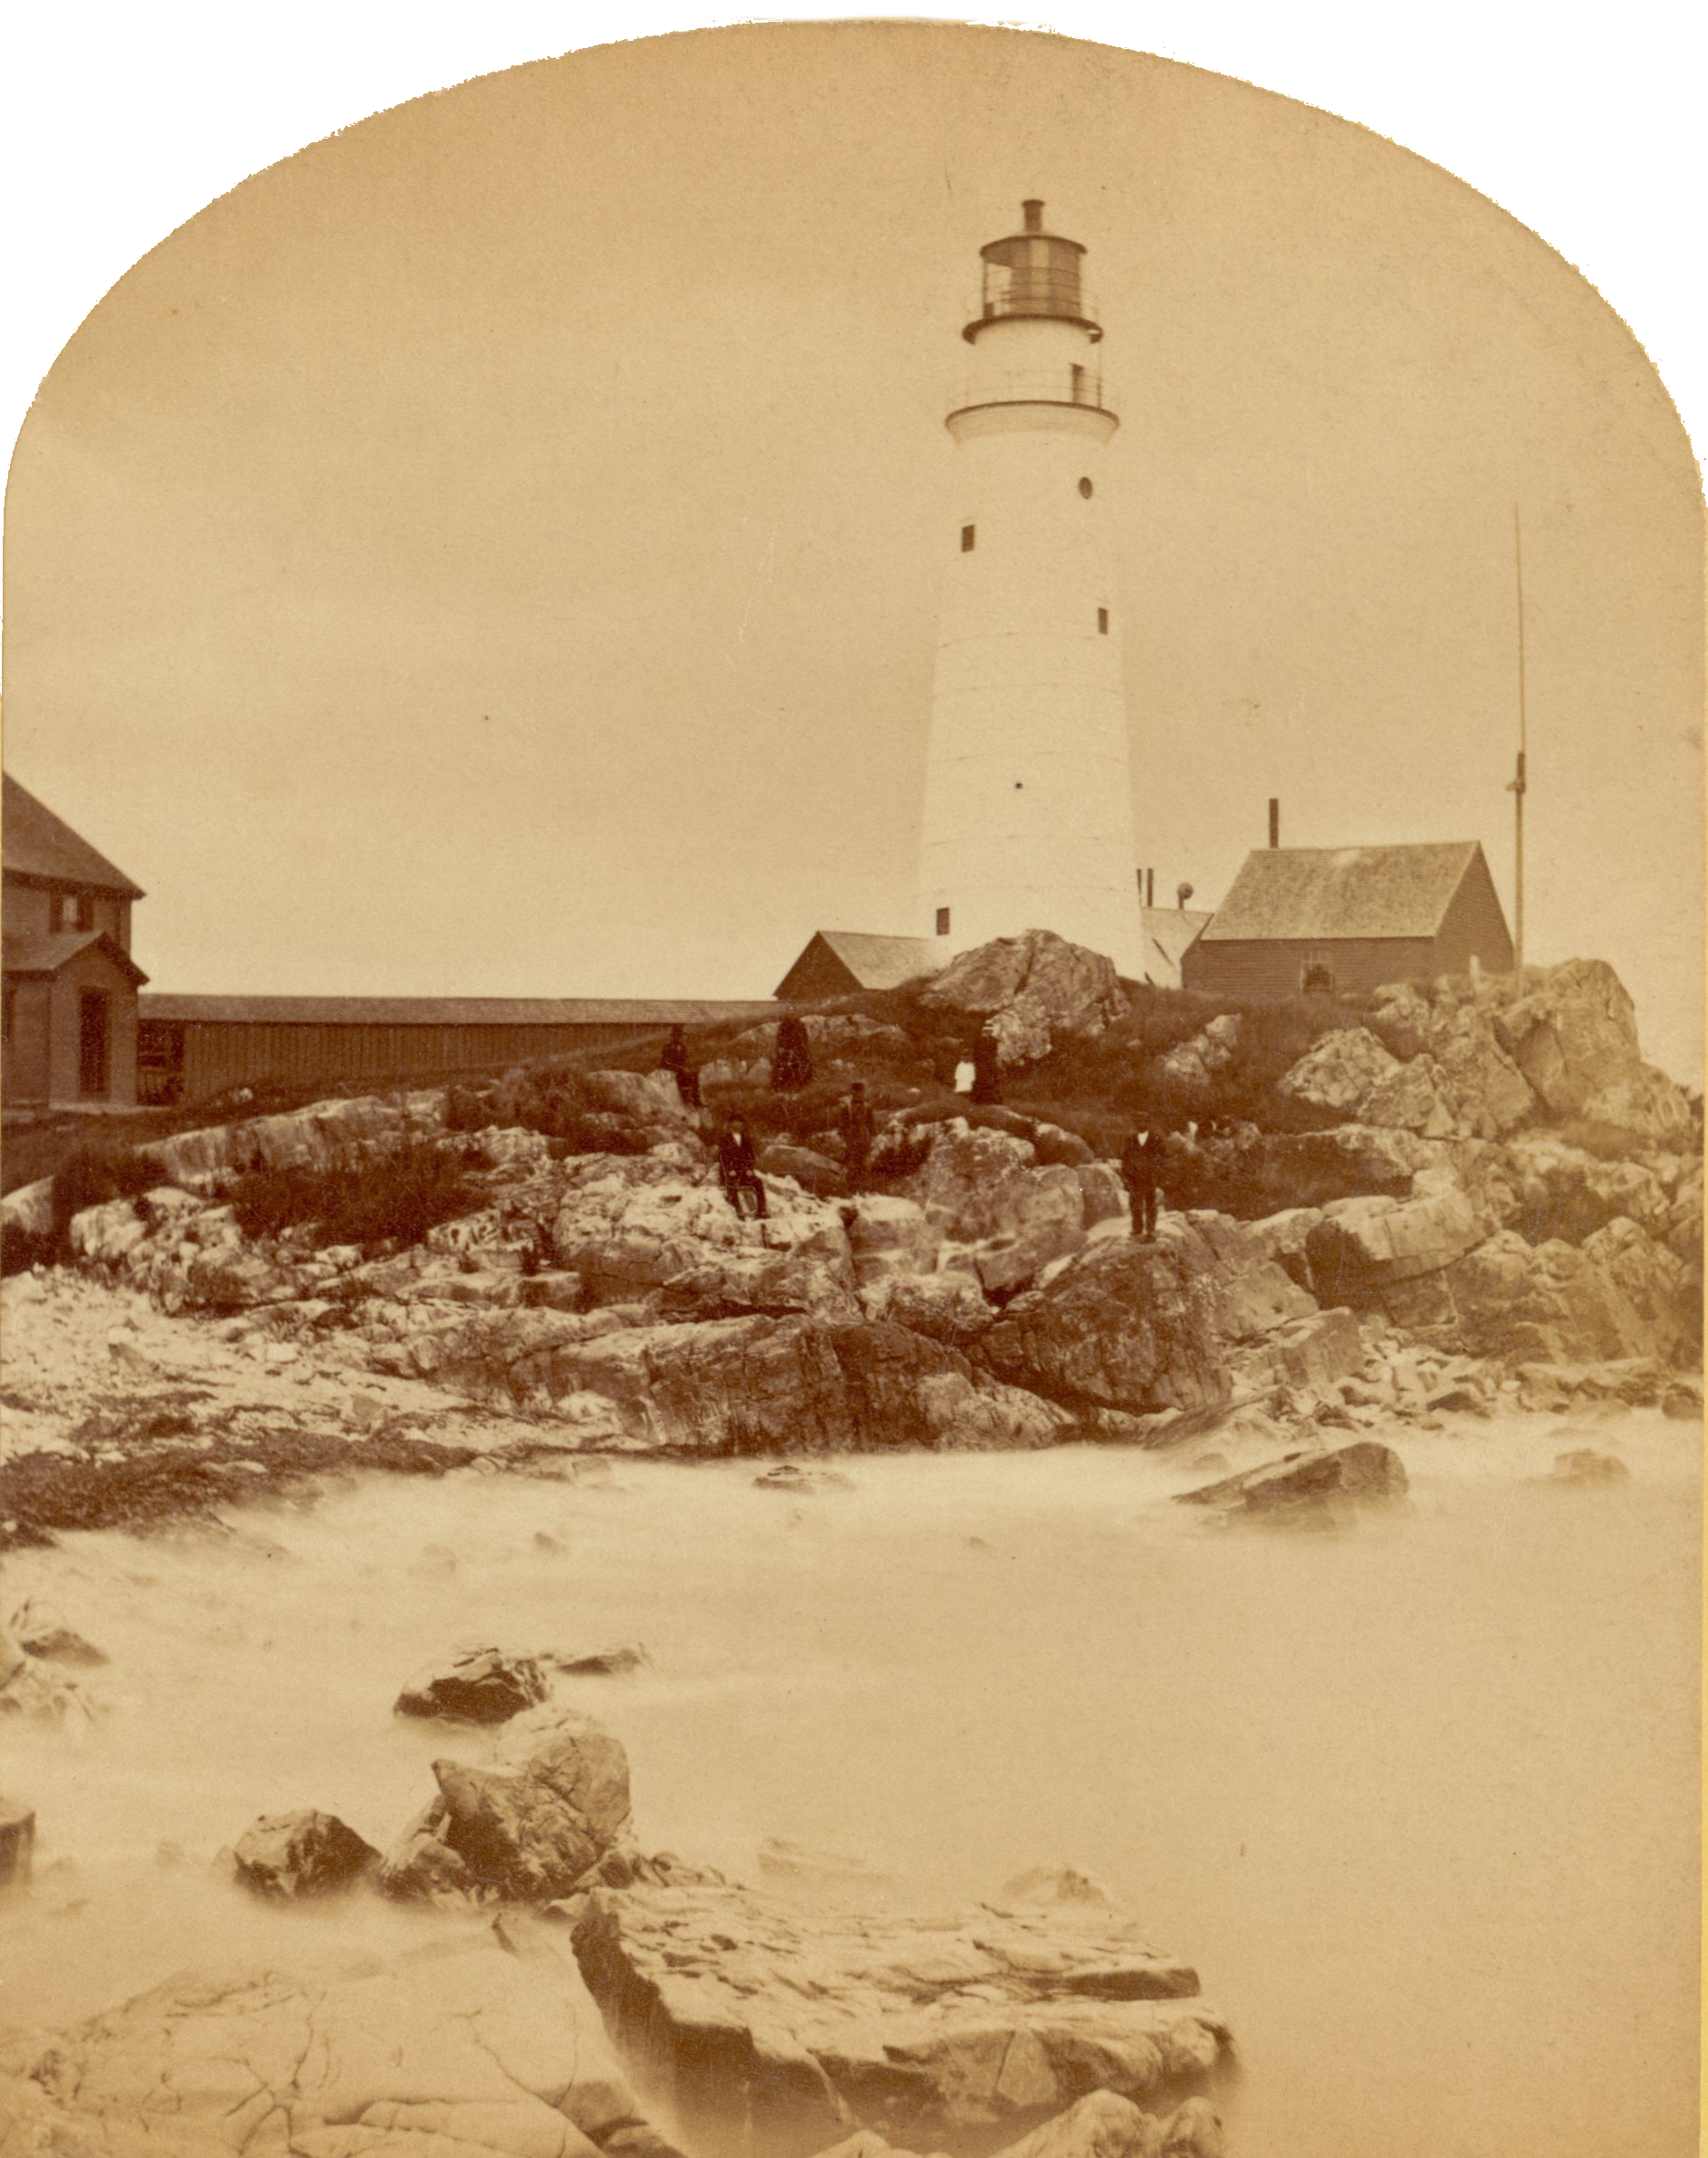 Photograph of Boston Light House in Boston Harbor, with people standing and sitting on large rocks in front of it.